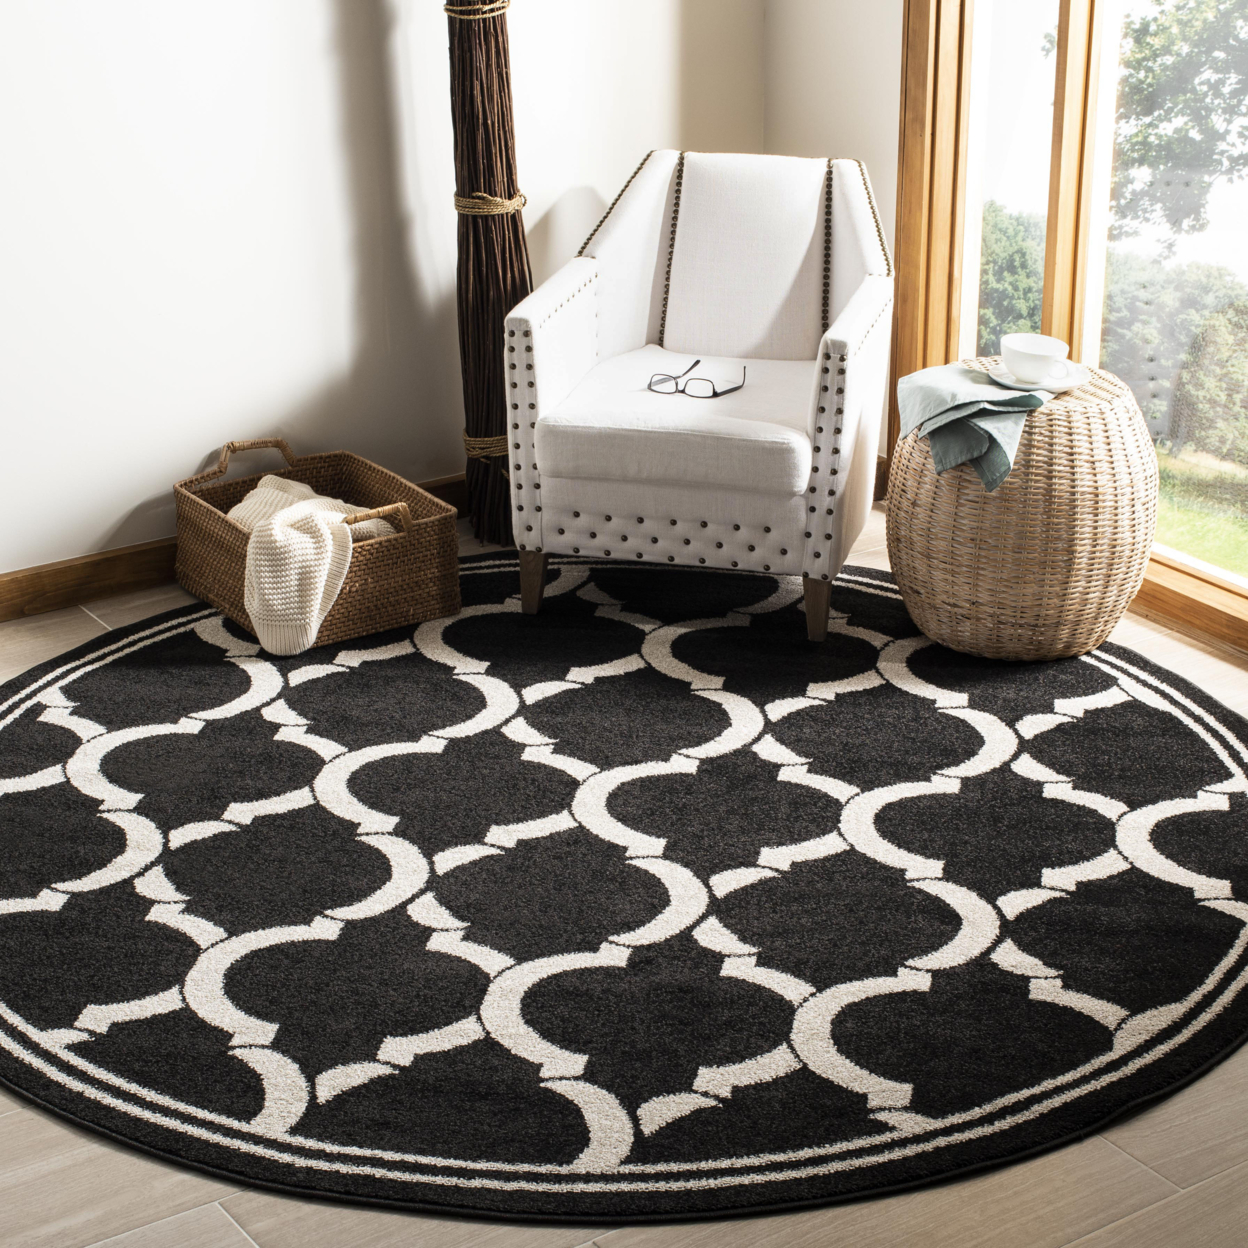 SAFAVIEH Amherst Collection AMT415G Anthracite/Ivory Rug - 2' 6 X 4'